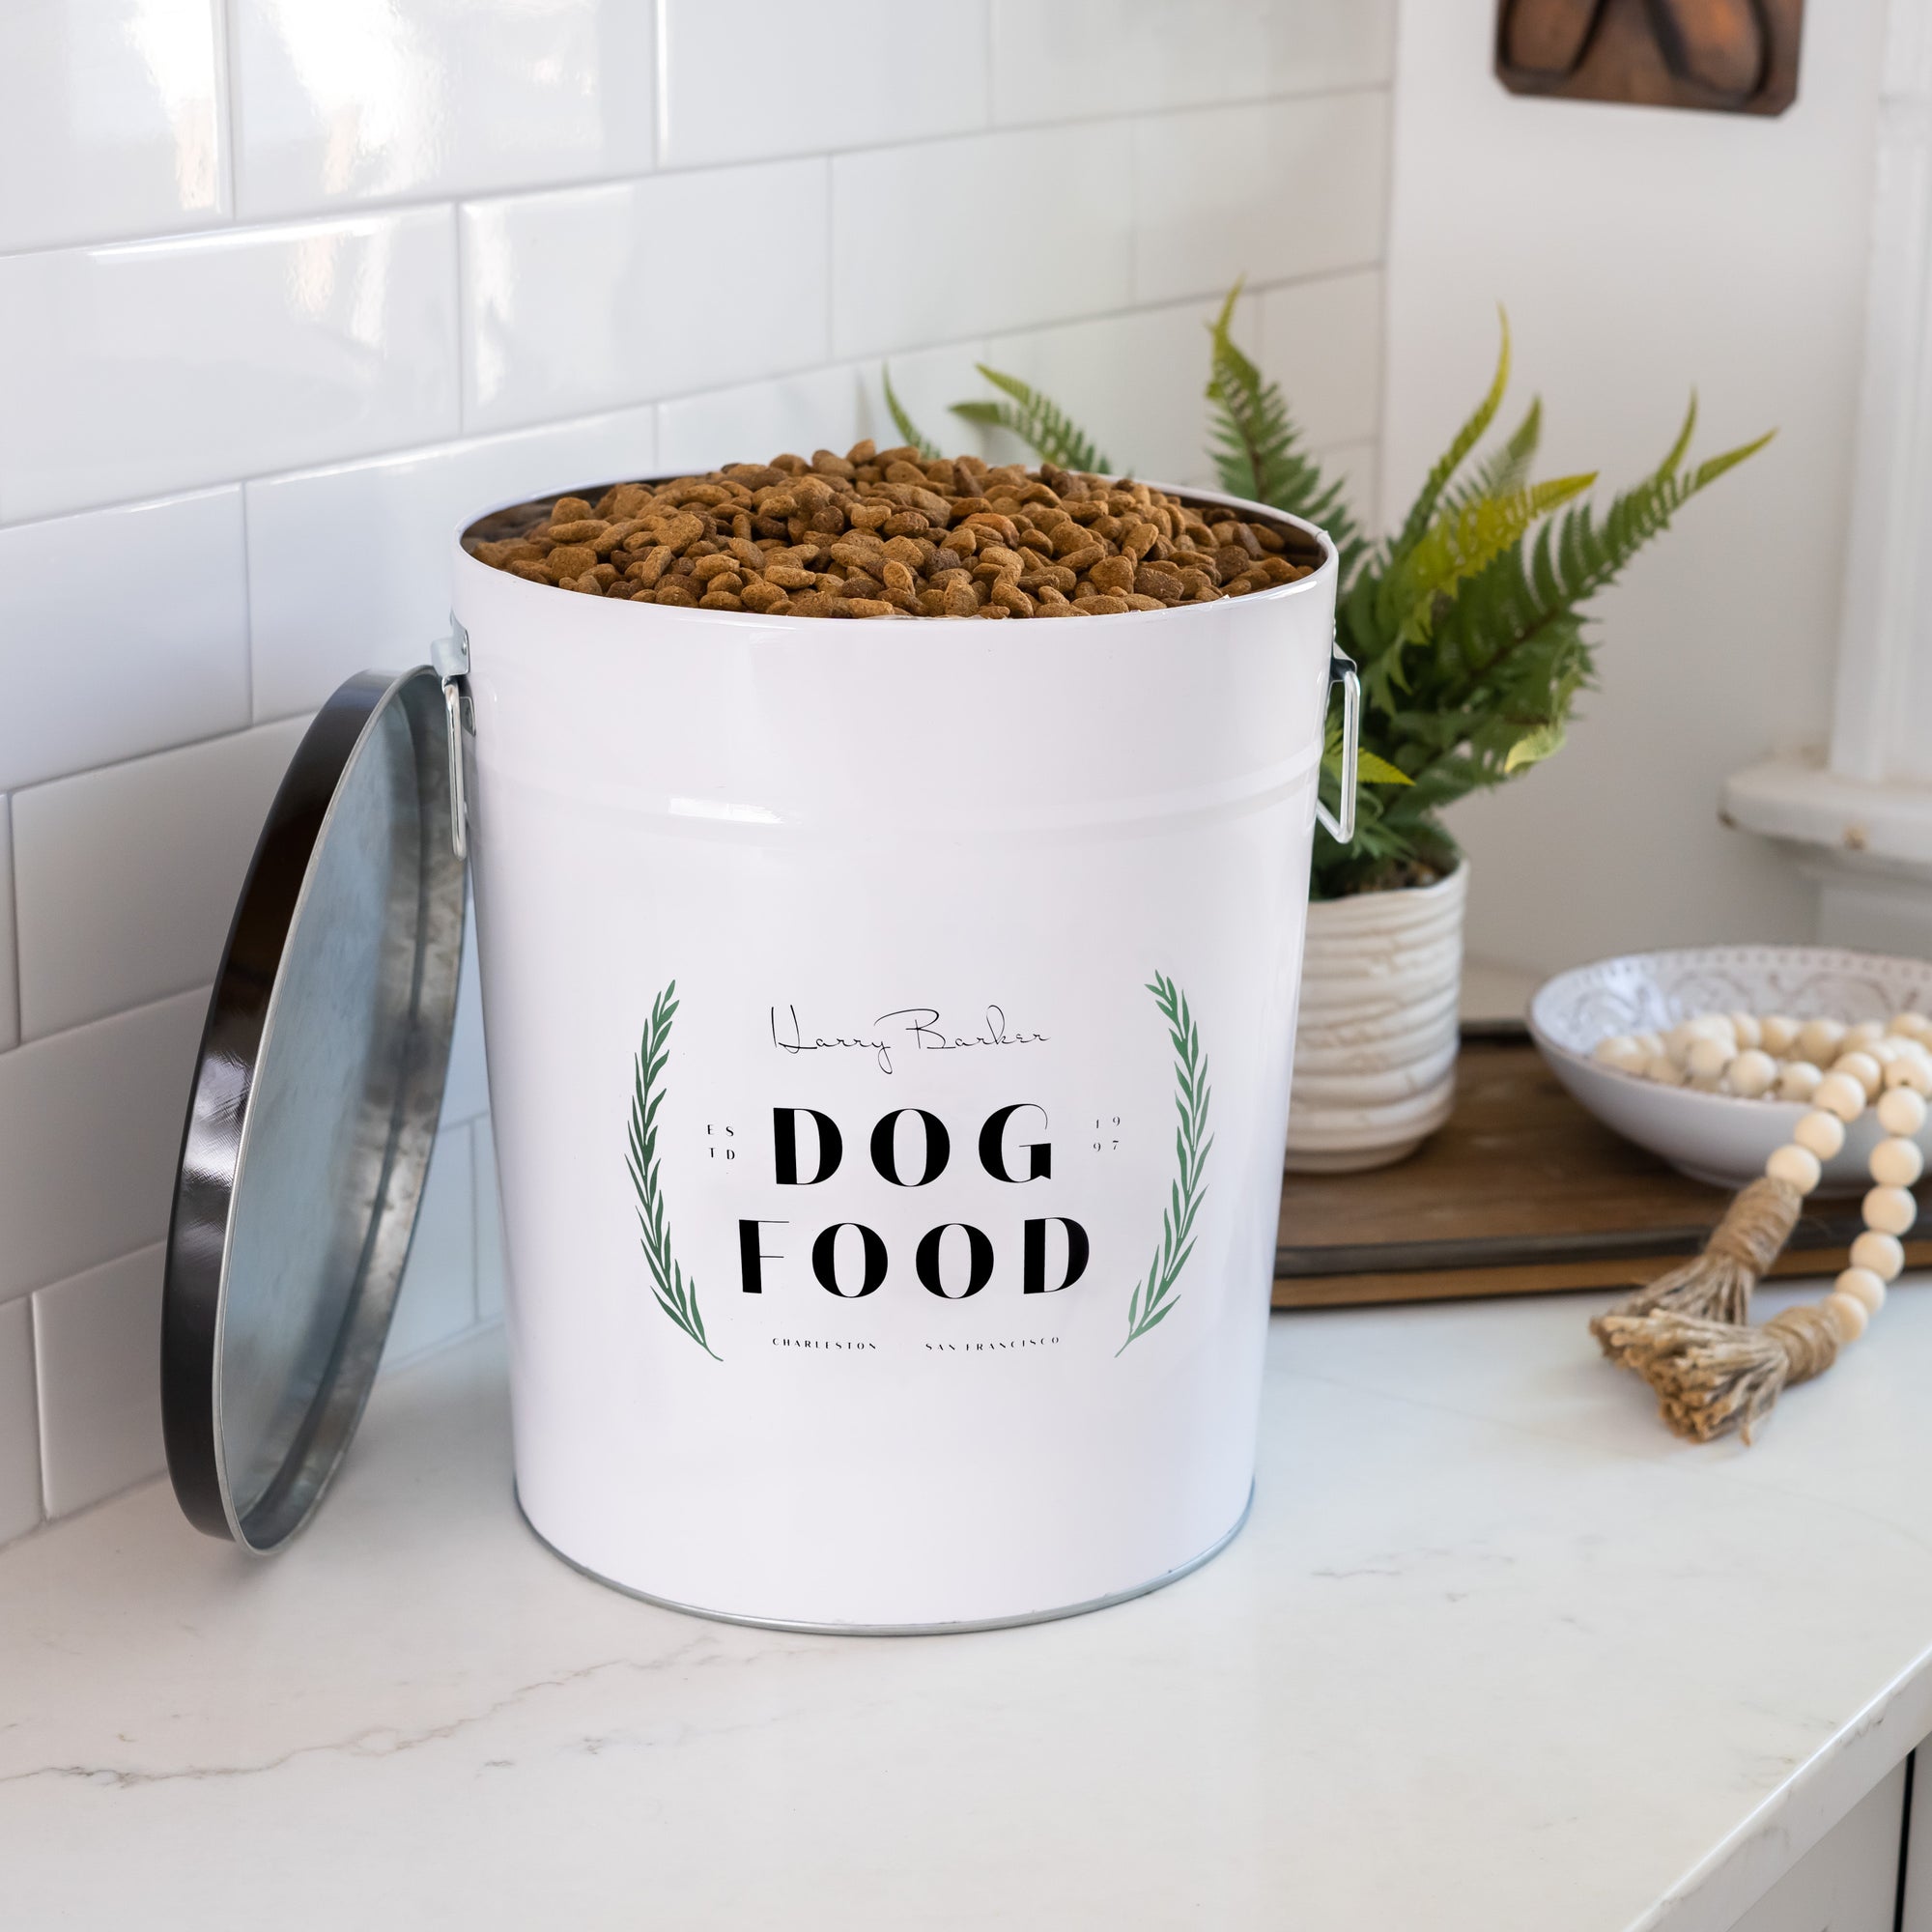 Dog Food Storage Containers, Bins, and Bags